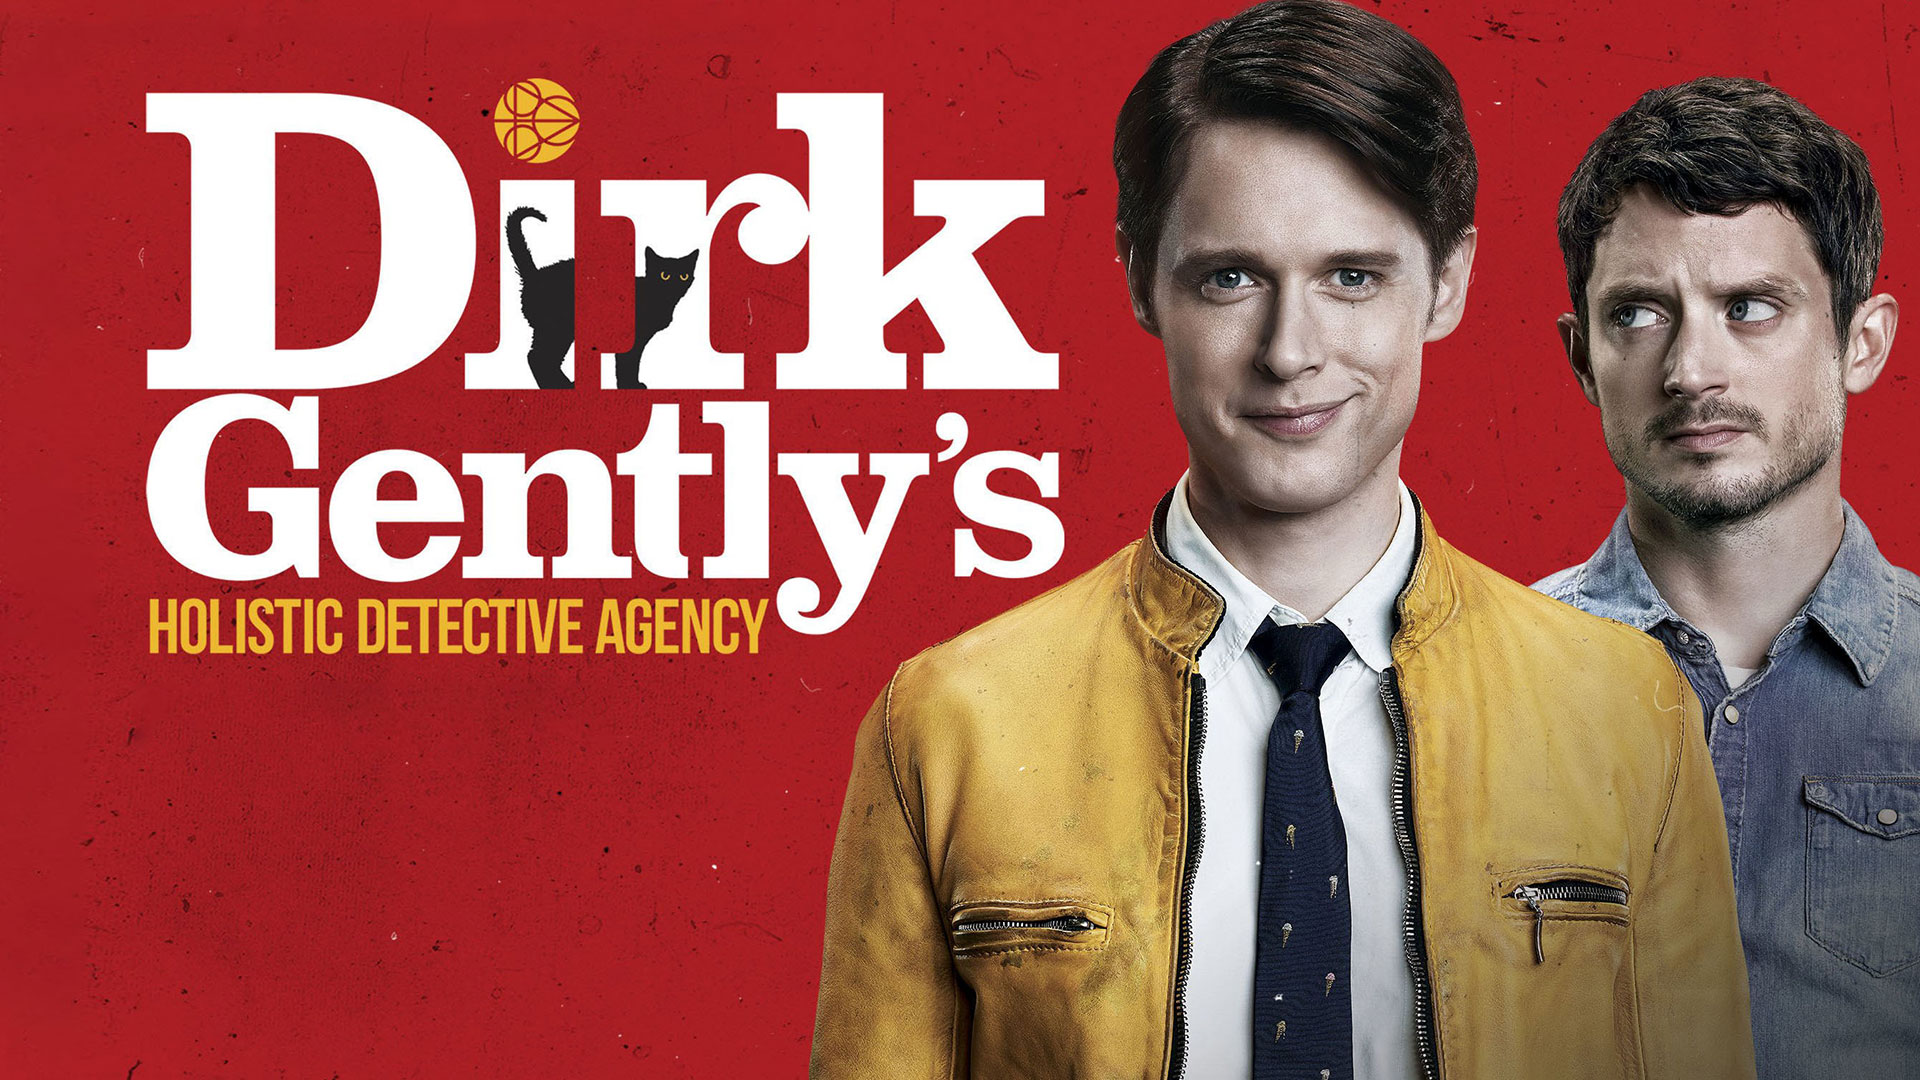 TV Show Dirk Gently's Holistic Detective Agency HD Wallpaper | Background Image